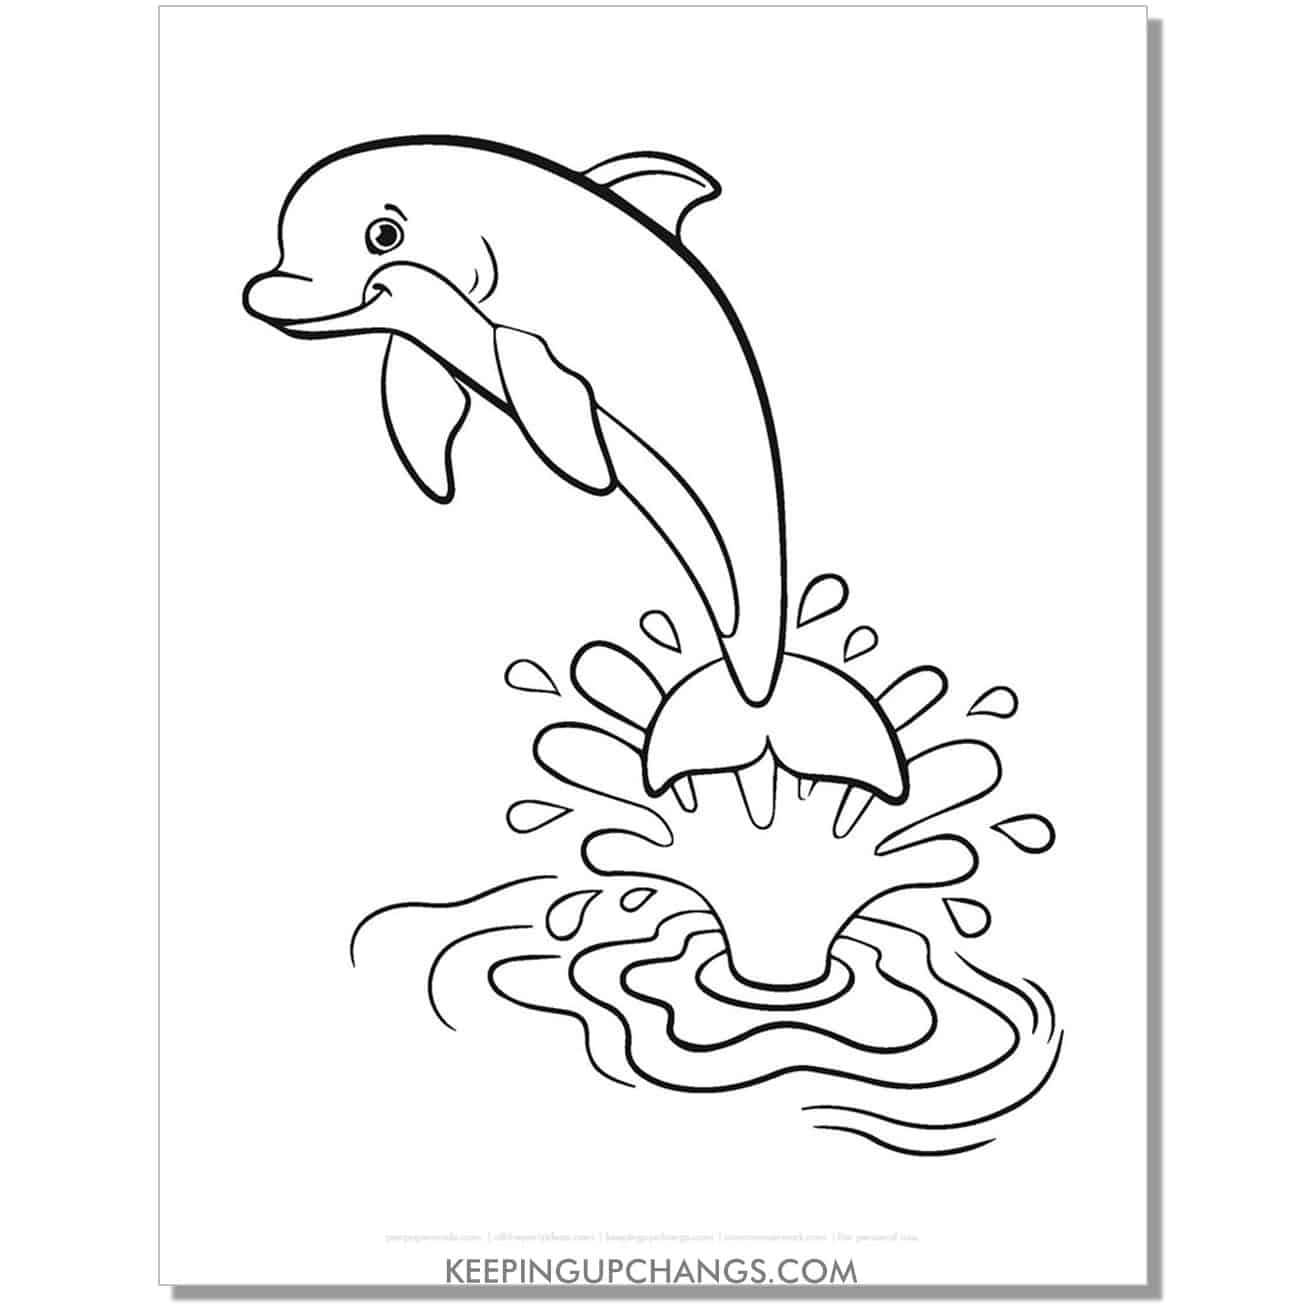 free dolphin jumping out of water coloring page, sheet.